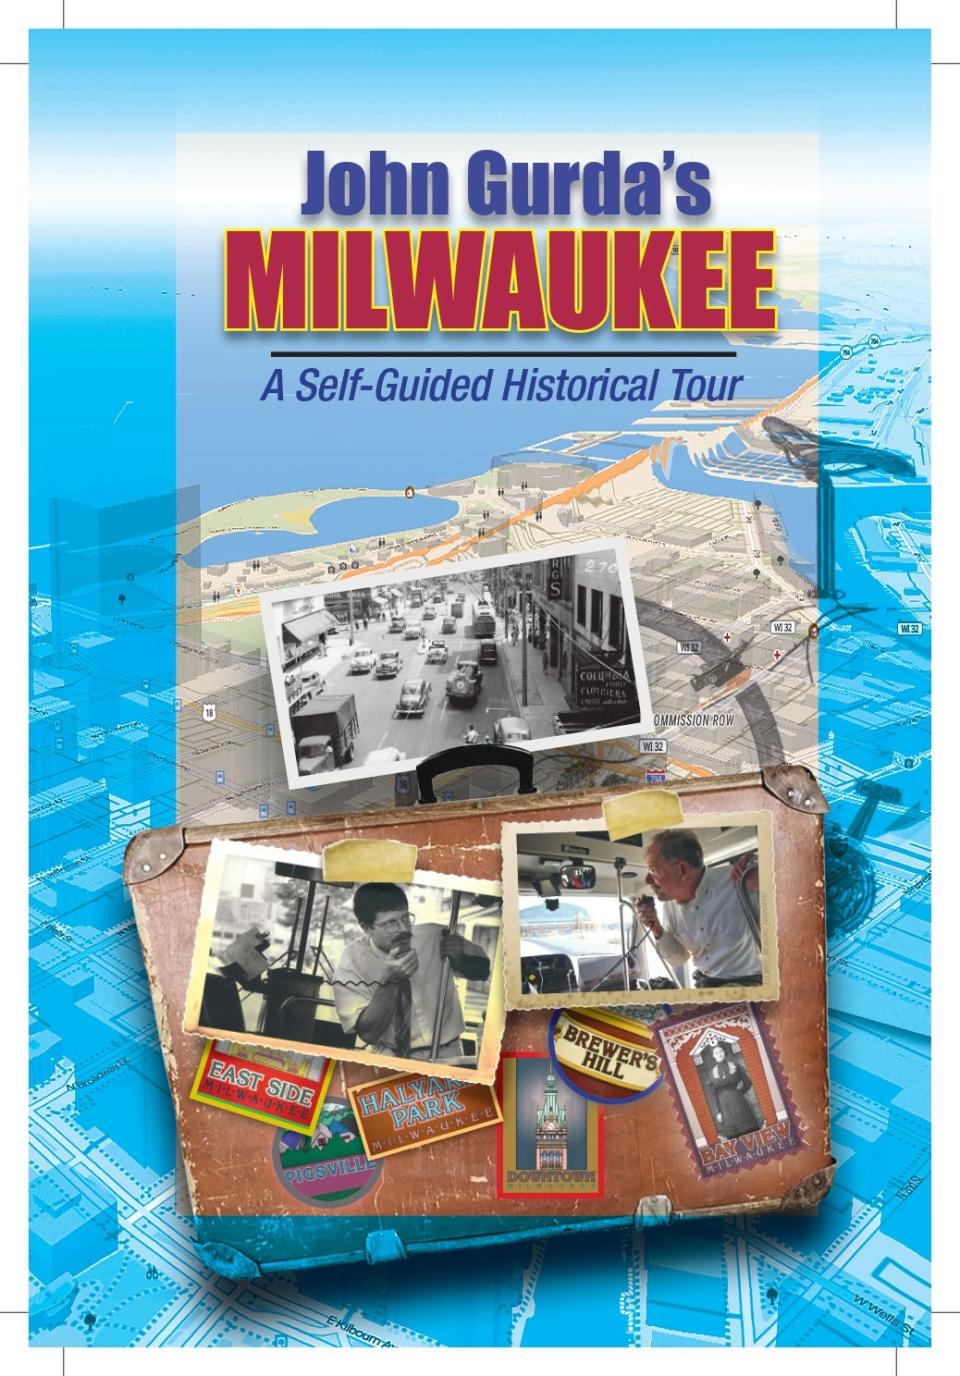 Book cover image for "John Gurda's Milwaukee: A Self-Guided Historical Tour."